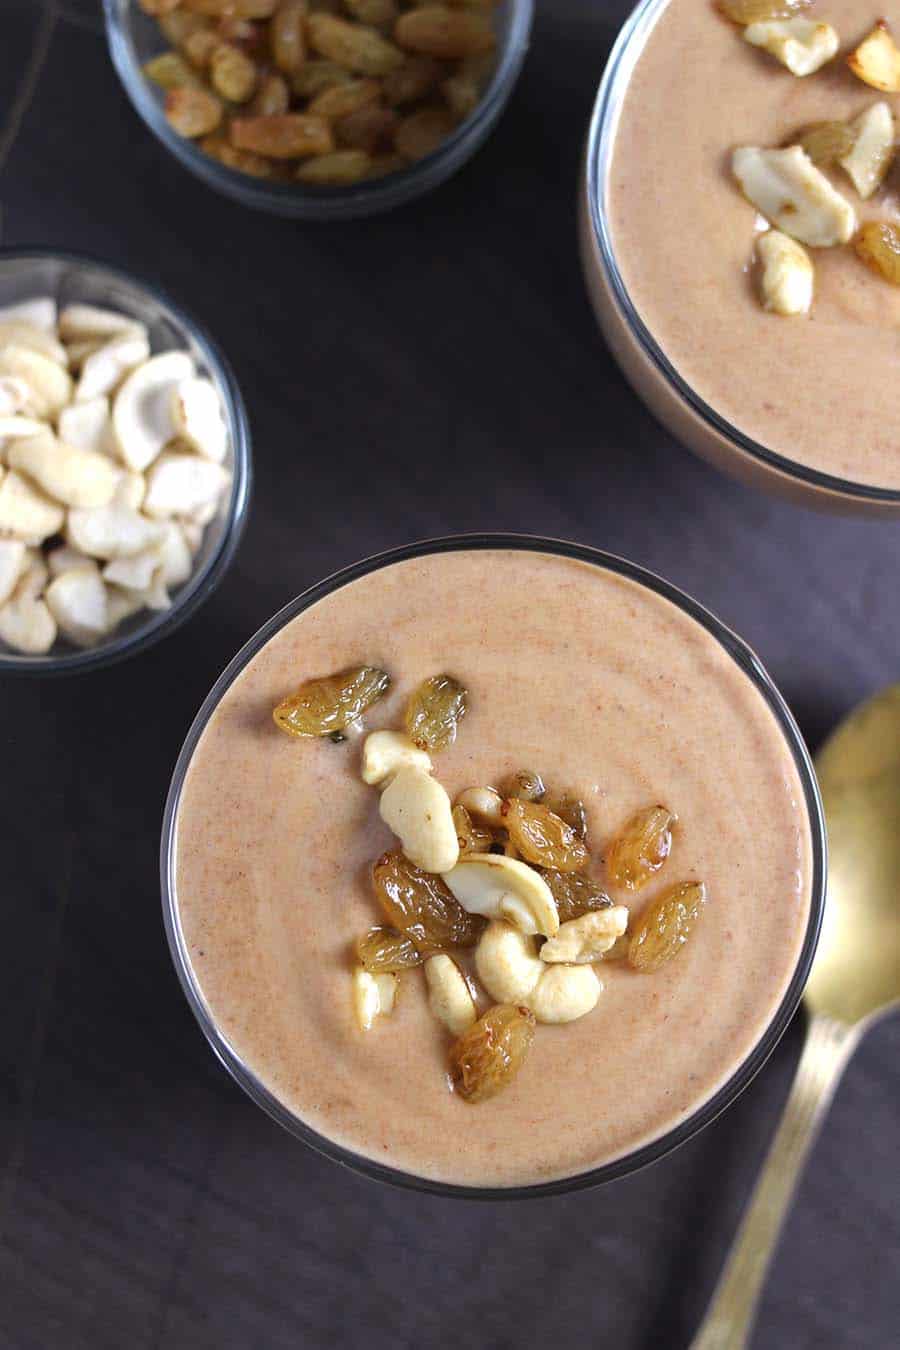 healthy sugar free, weight loss, diabetic friendly sweets and desserts #kheer #Payasam #pudding 